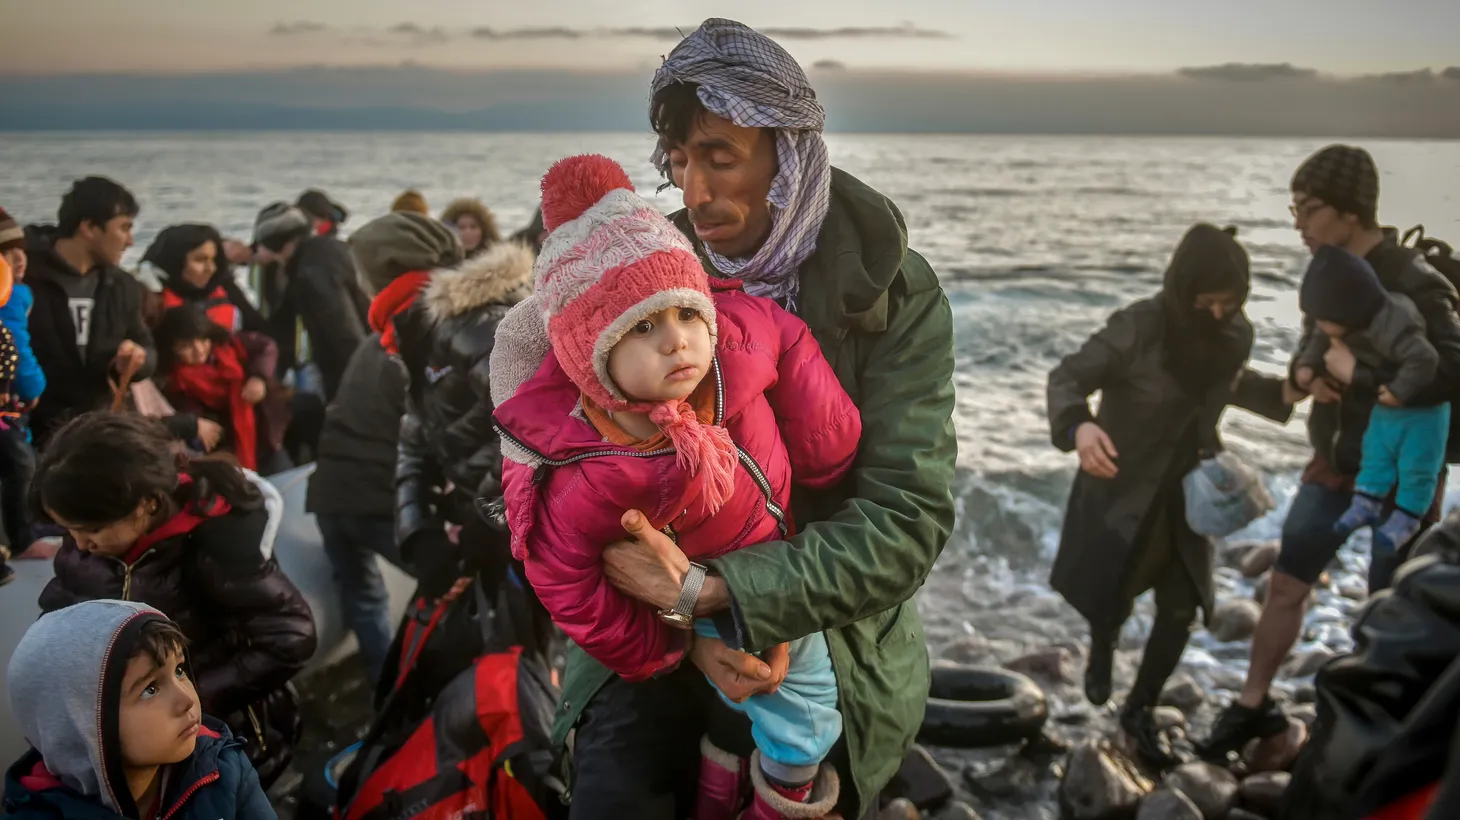 Refugees and Migrants aboard reach the Greek Island of Lesbos after crossing on a dinghy the Aegean sea from Turkey. Lesbos, Greece, March 2, 2020.